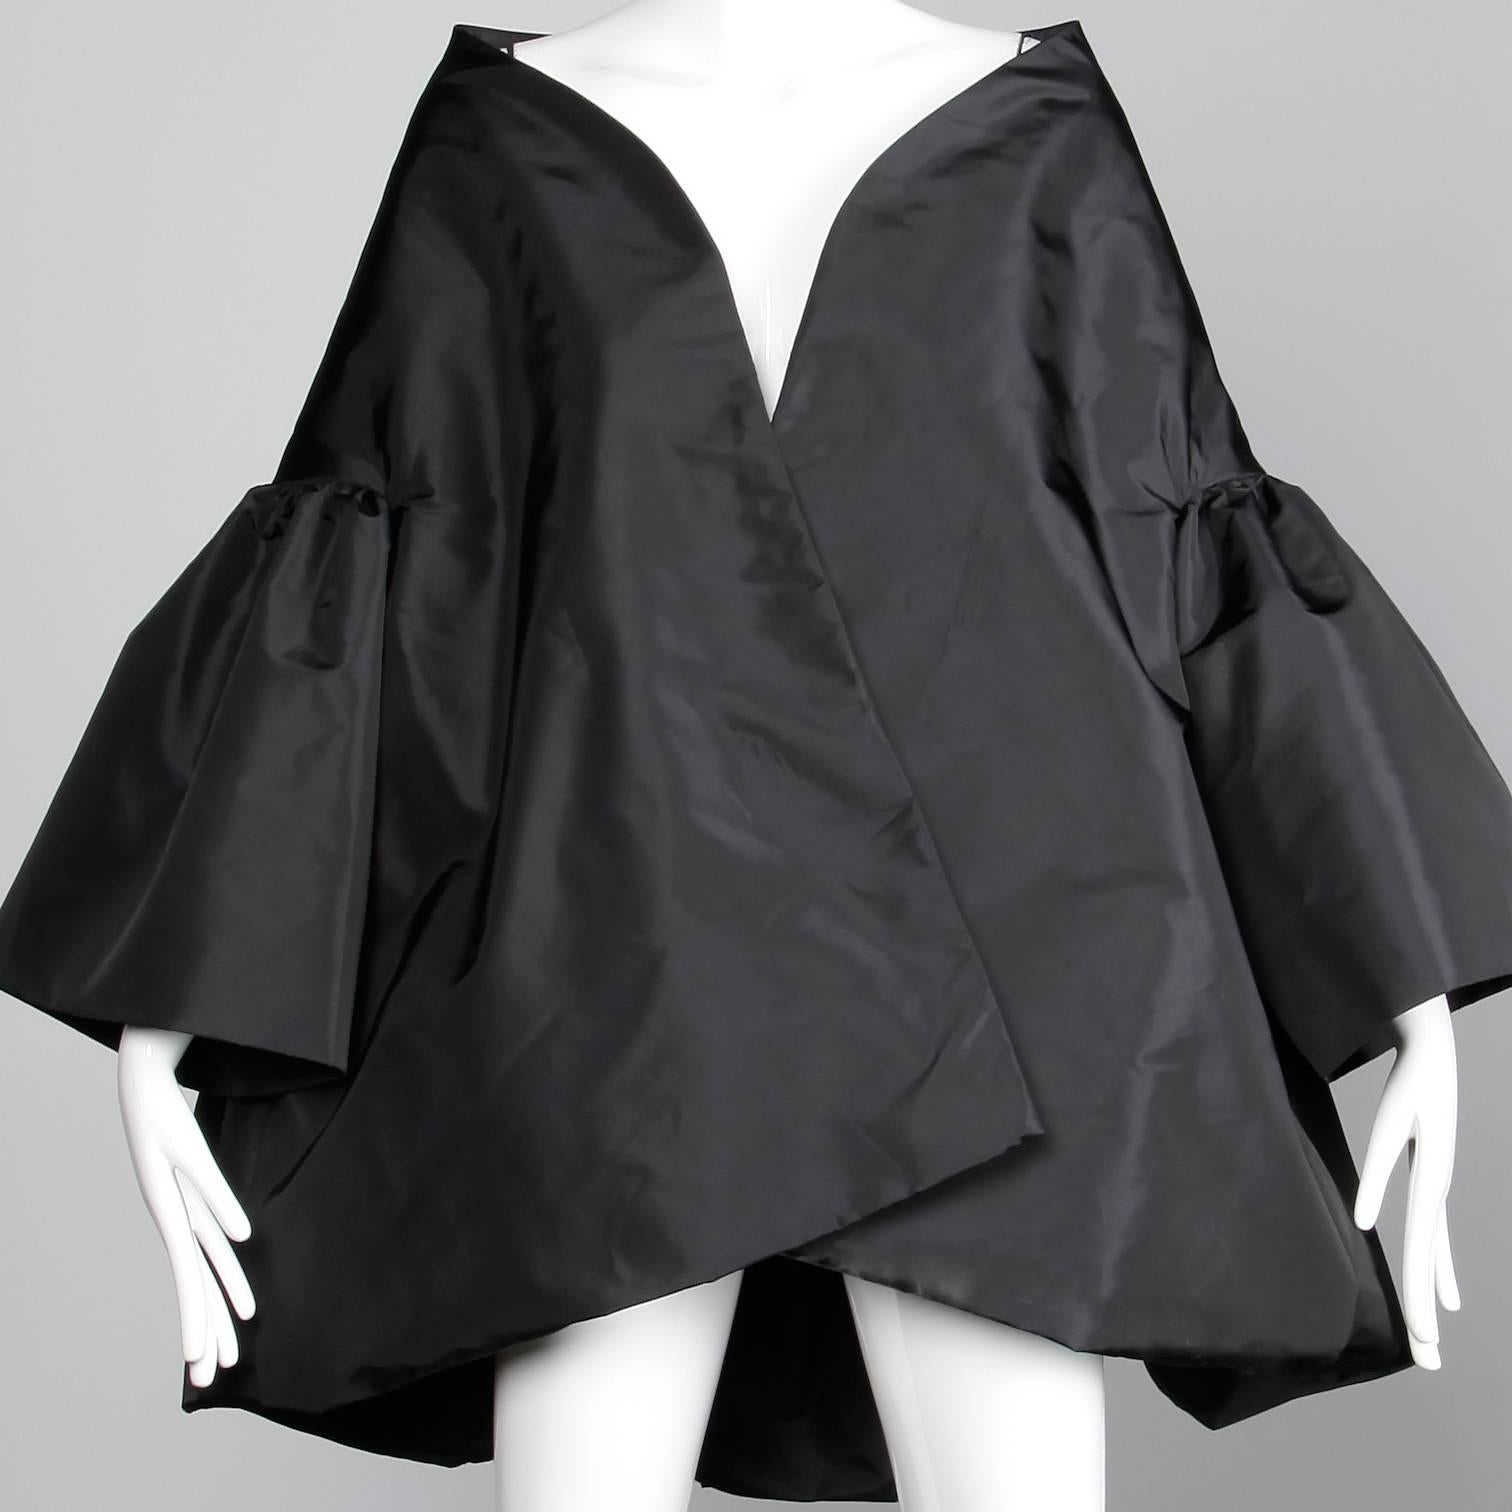 Amazing Victor Costa Black Taffeta Opera Cape Coat or Jacket with Bell Sleeves 2